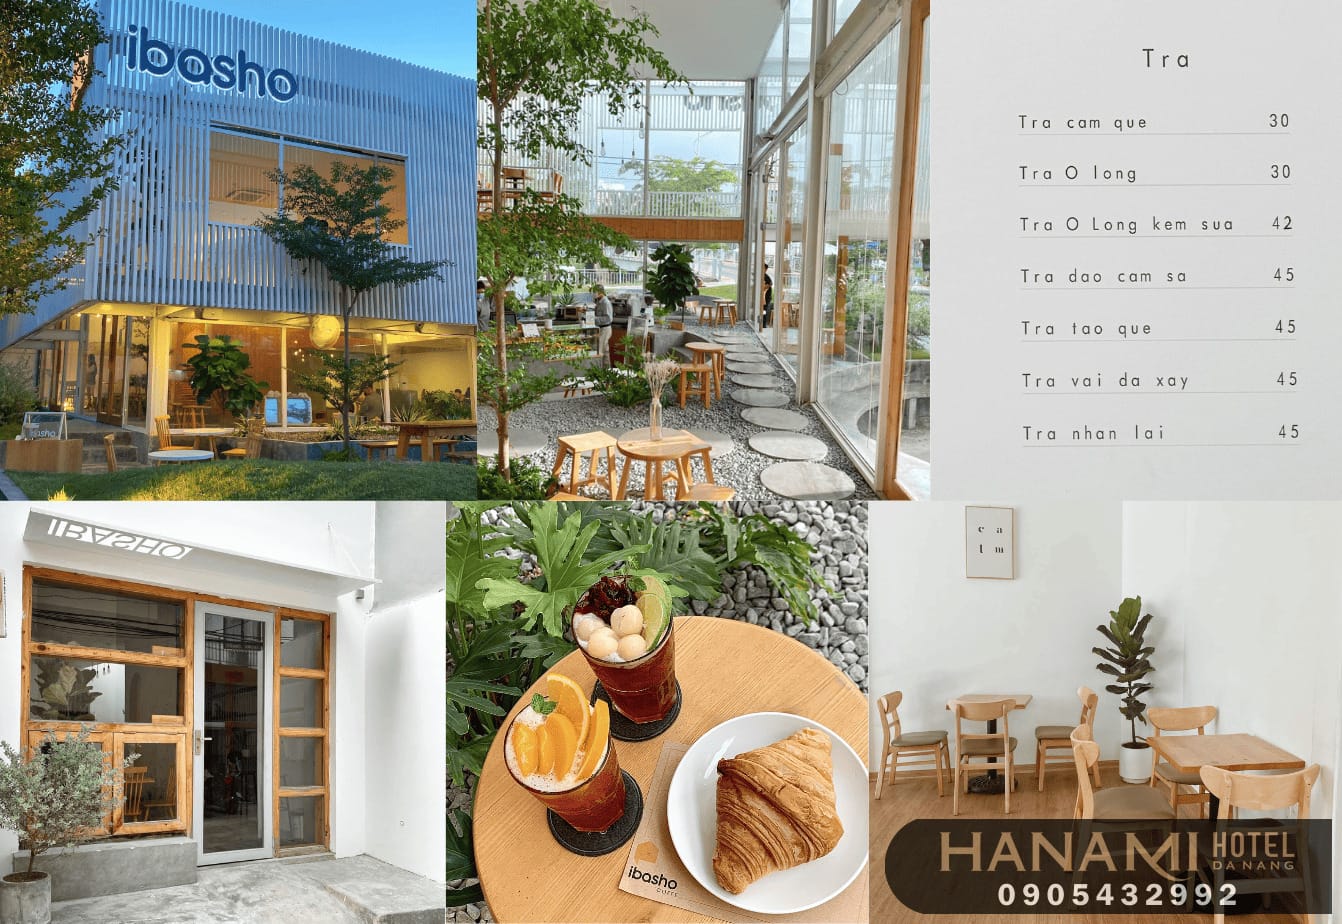 beautiful cafes in thanh khe district of da nang